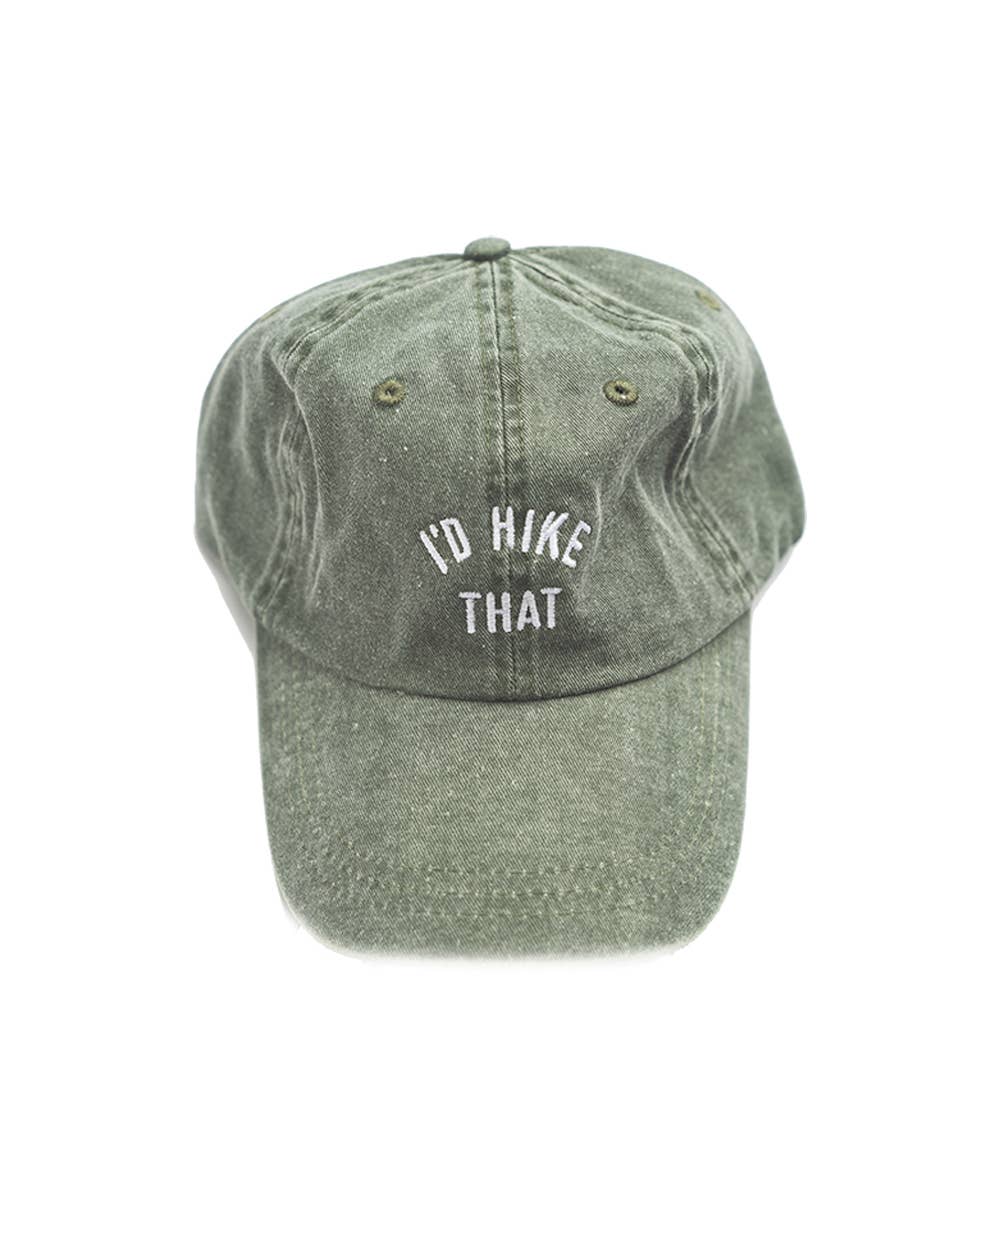 I'd Hike That dad hat by Keep Nature Wild